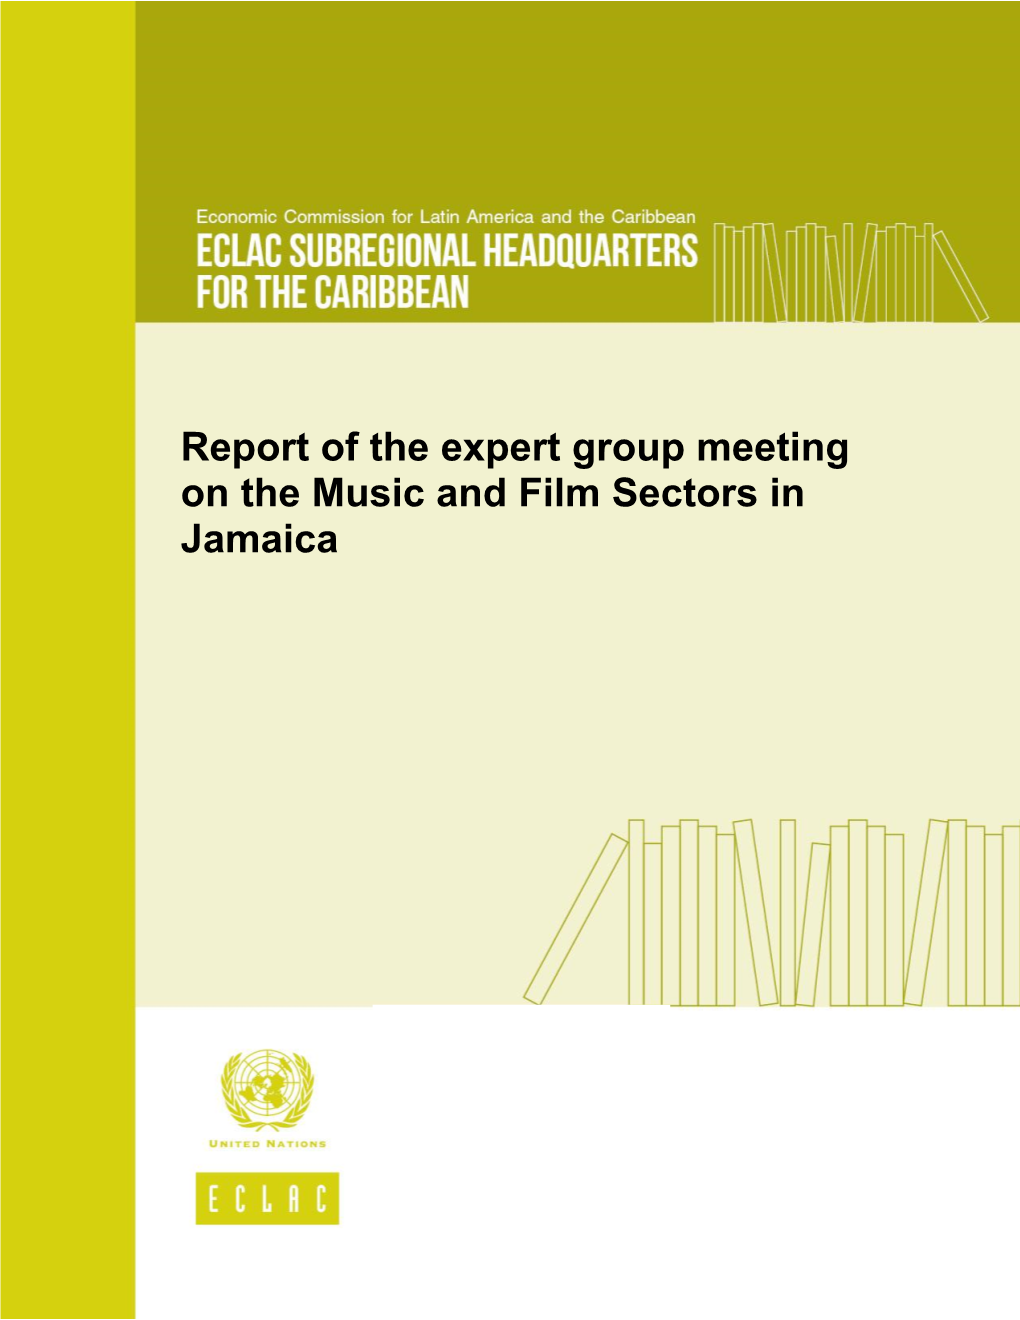 Report of the Expert Group Meeting on the Music and Film Sectors in Jamaica